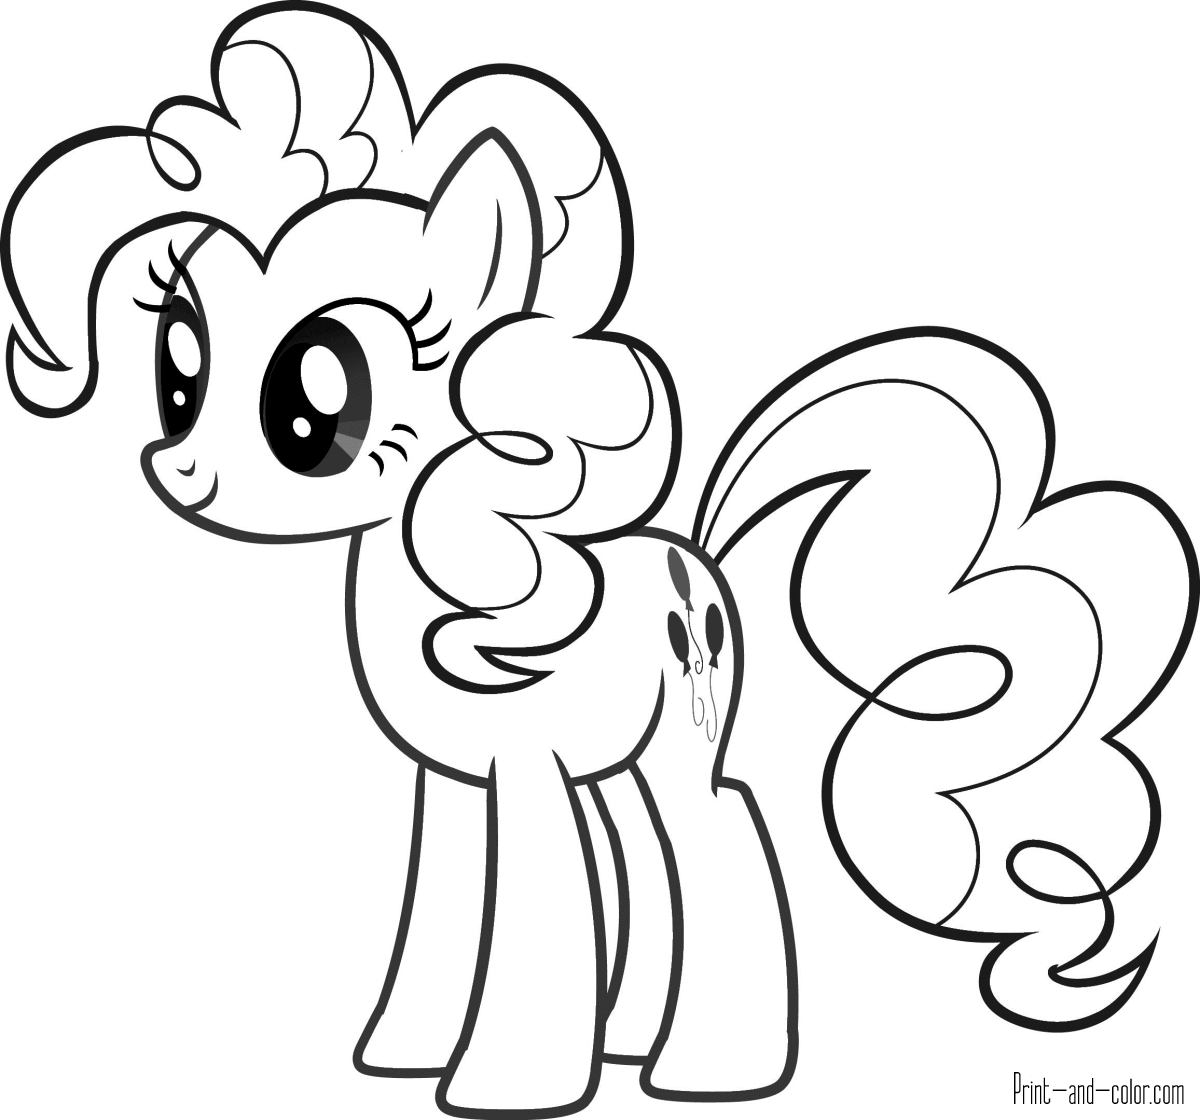 my little pony colors my little pony coloring pages print and colorcom little my colors pony 